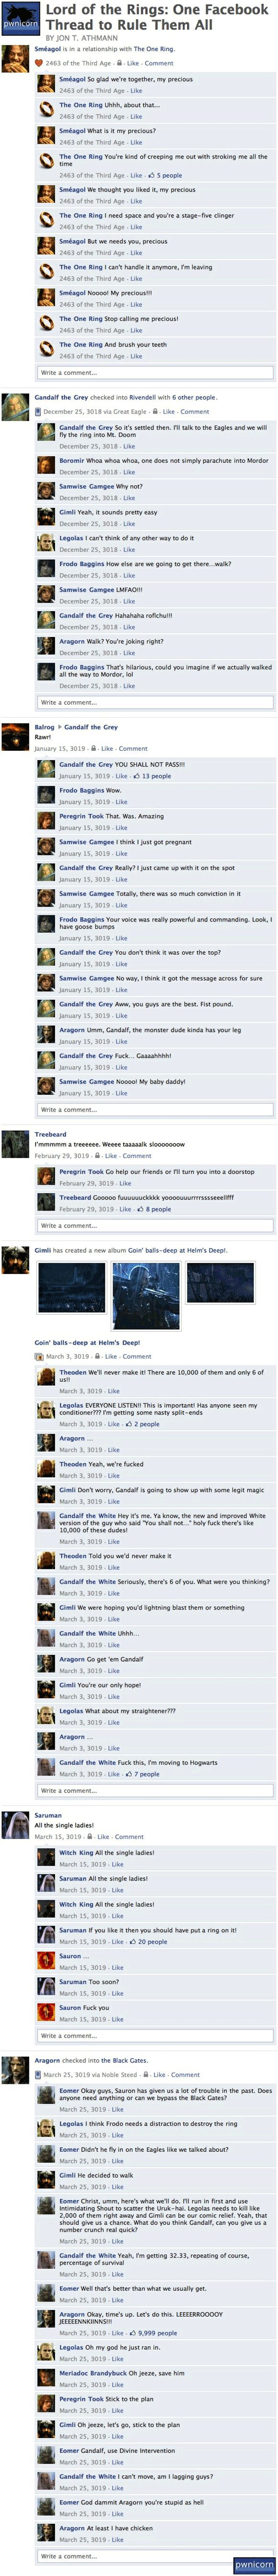 Lord of the Rings: One Facebook Thread to Rule Them All